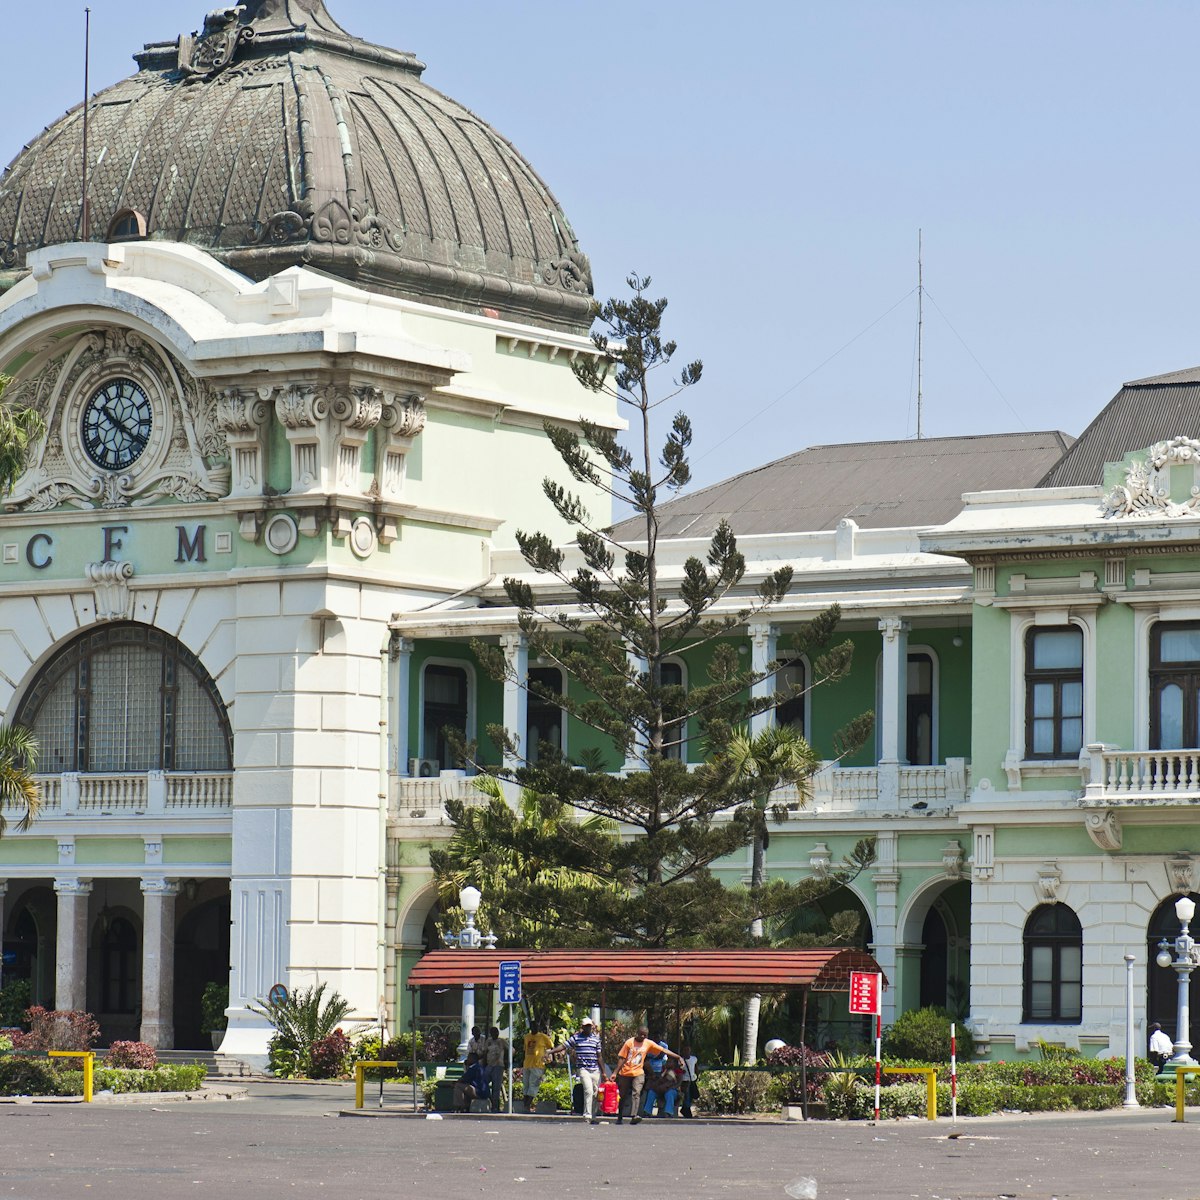 Mozambique, Maputo, the Baixa area, the victorian style railway station designed by G. Eiffel in 1910